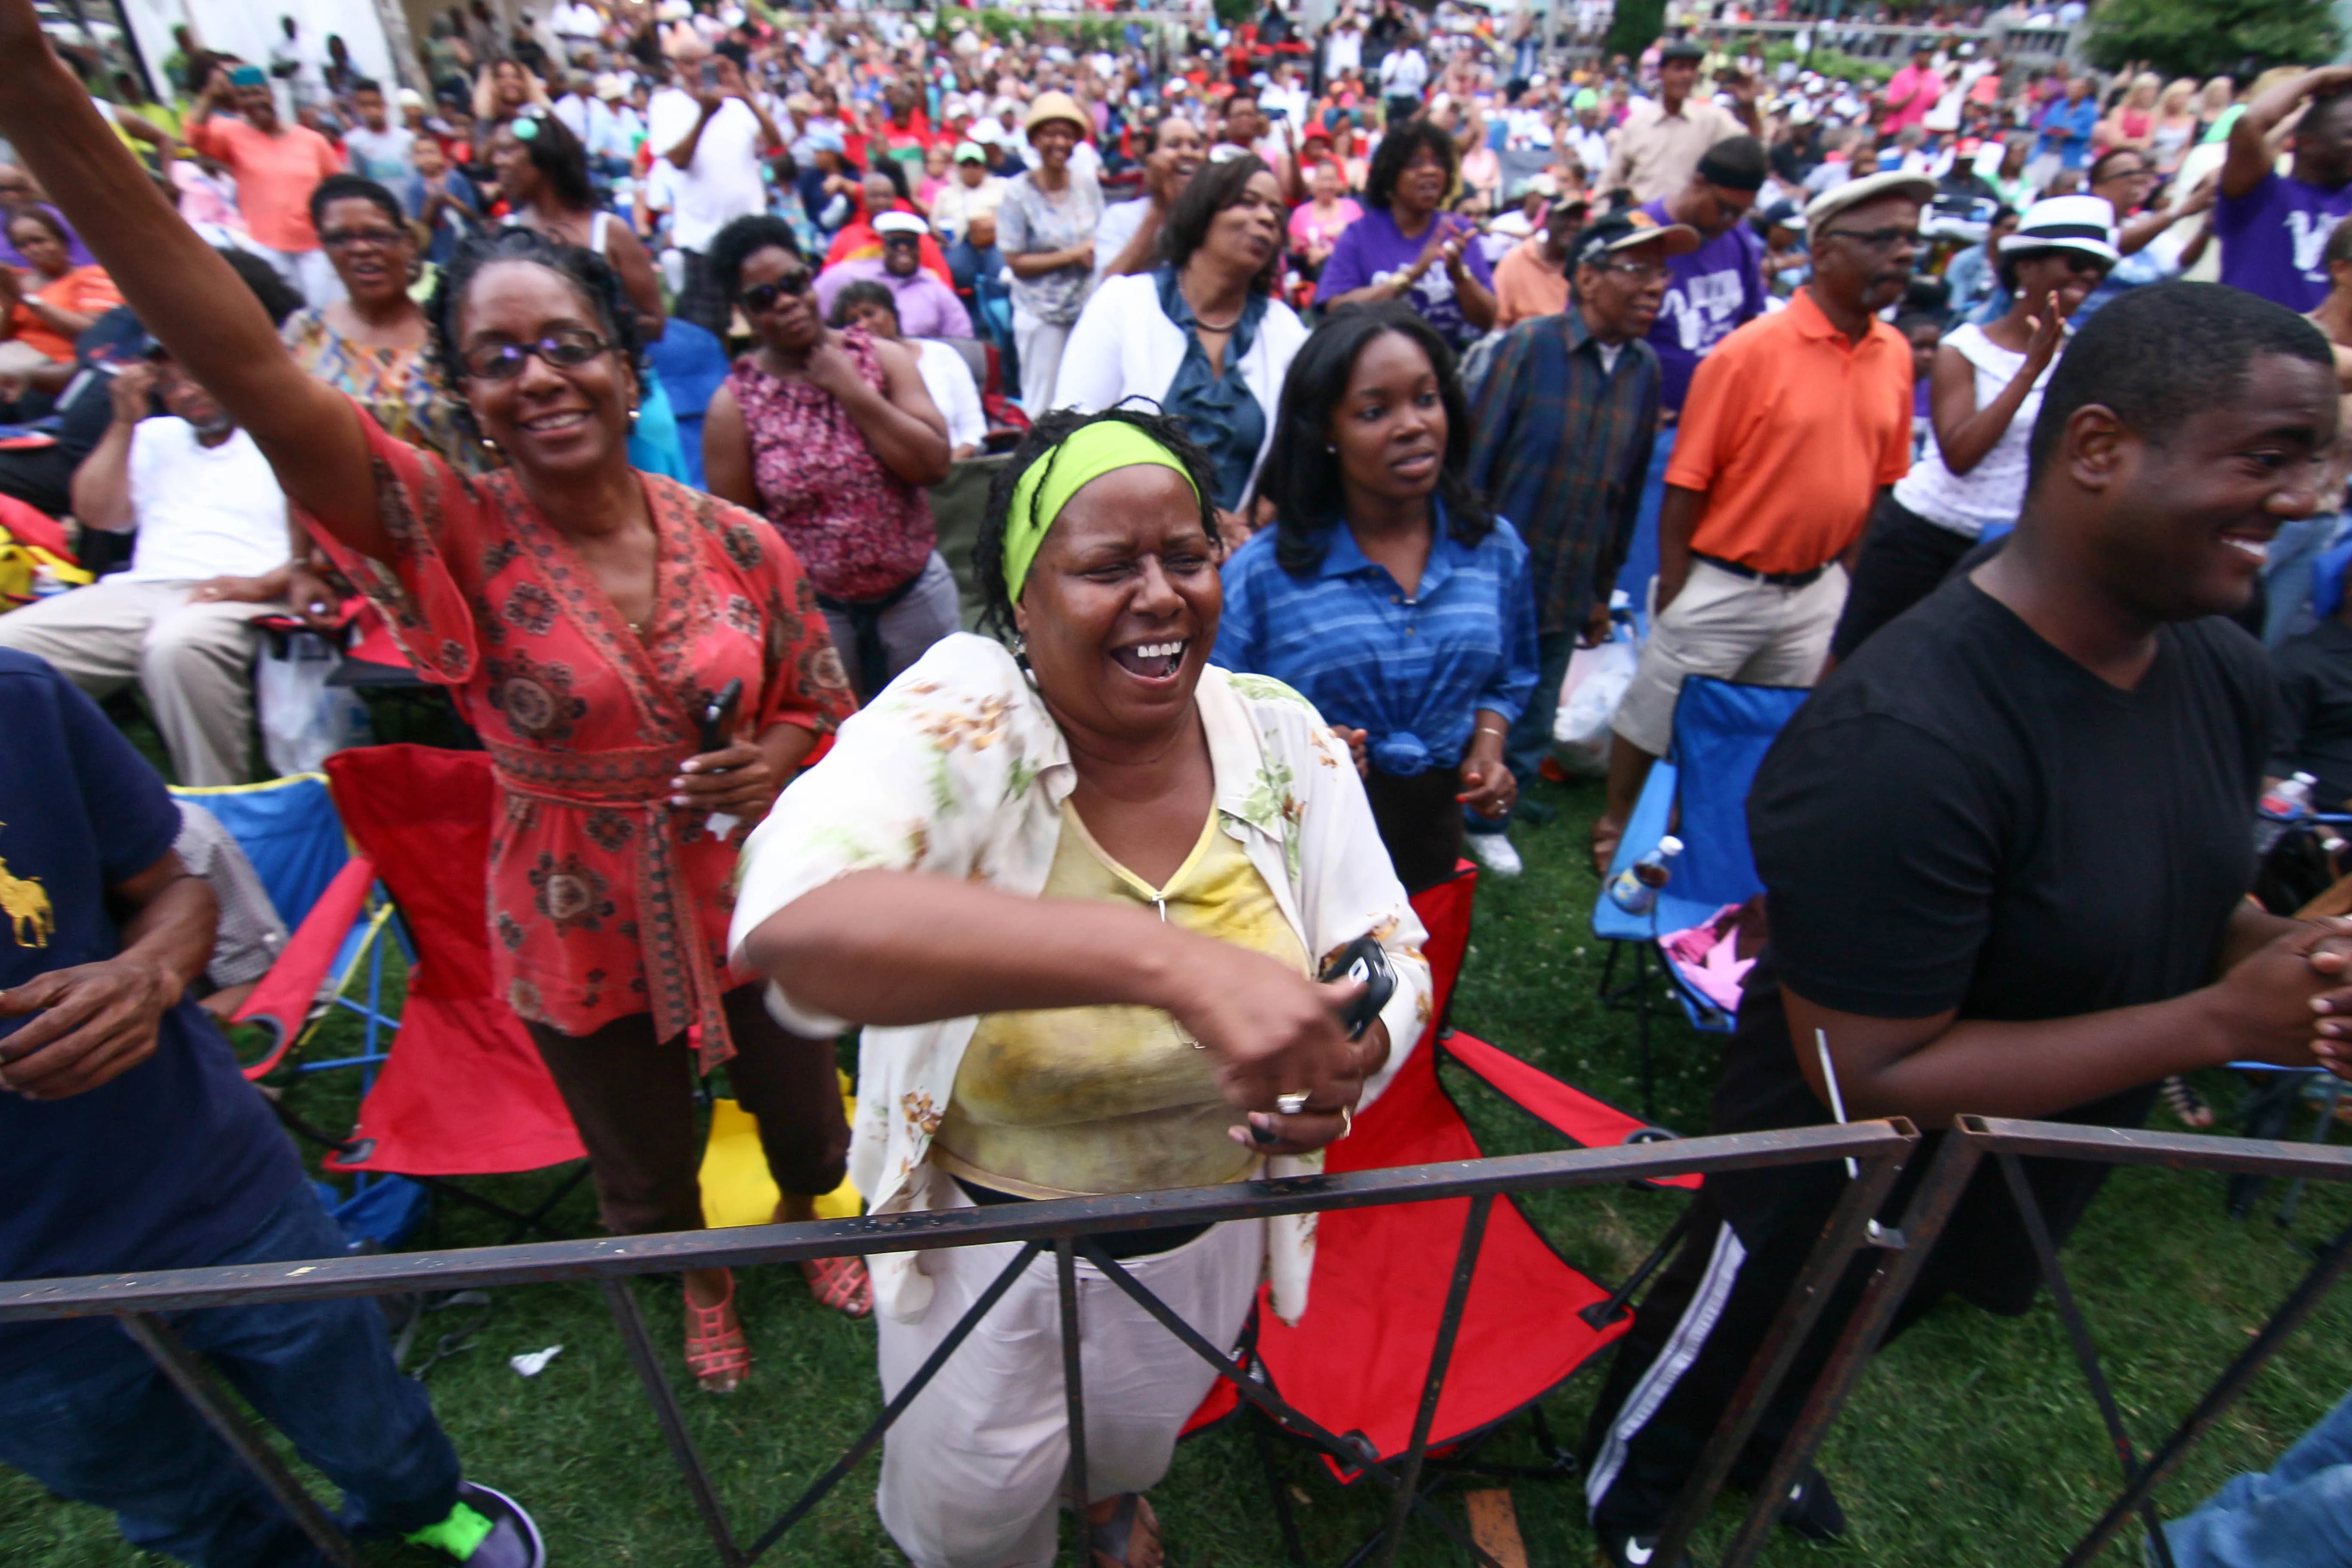 The crowd cheers during Brian Culbertson performance on the last day of the 26th annual duPont Clifford Brown Jazz Festival in 2014 at Rodney Square Park in Wilmington. This year's event, set for June 21-24, features performances by Grammy-winner Angélique Kidjo, the Marquis Hill Quartet, Monty Alexander’s Harlem Kingston Express, and others.